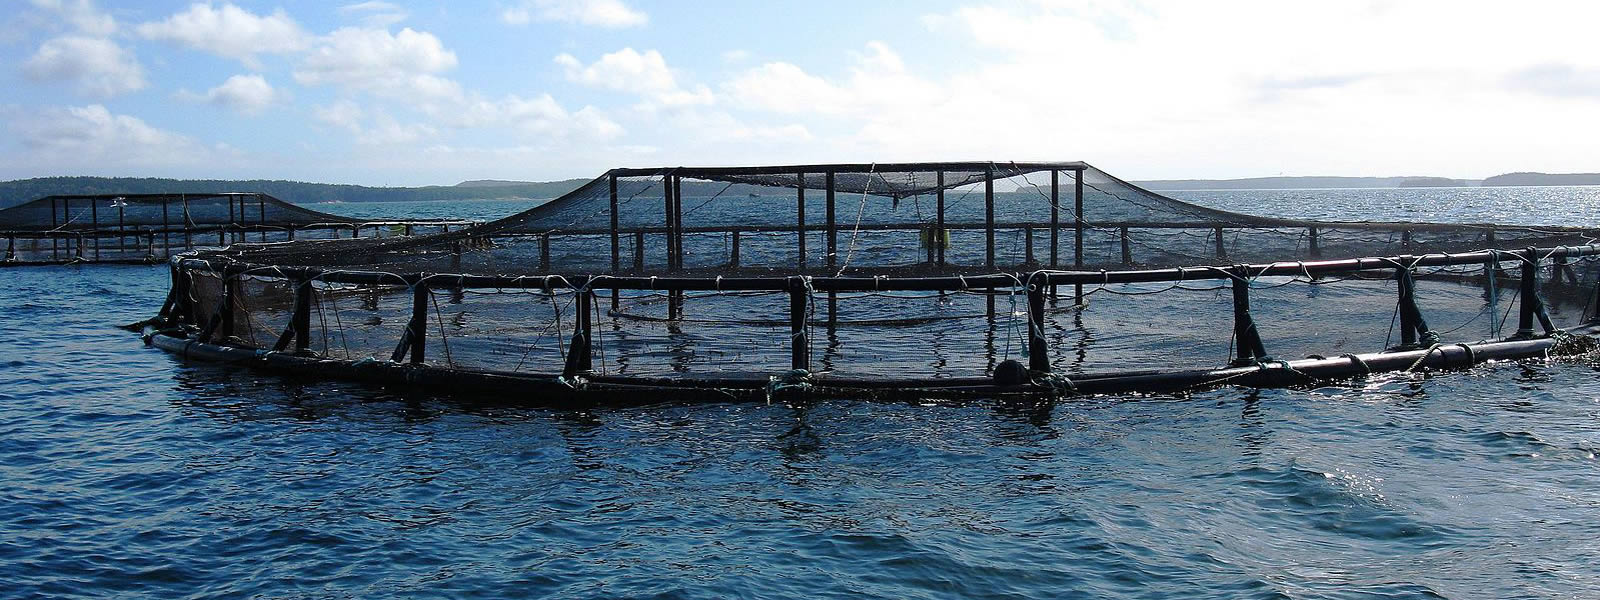 Two large netted enclosures sitting on a large body of water